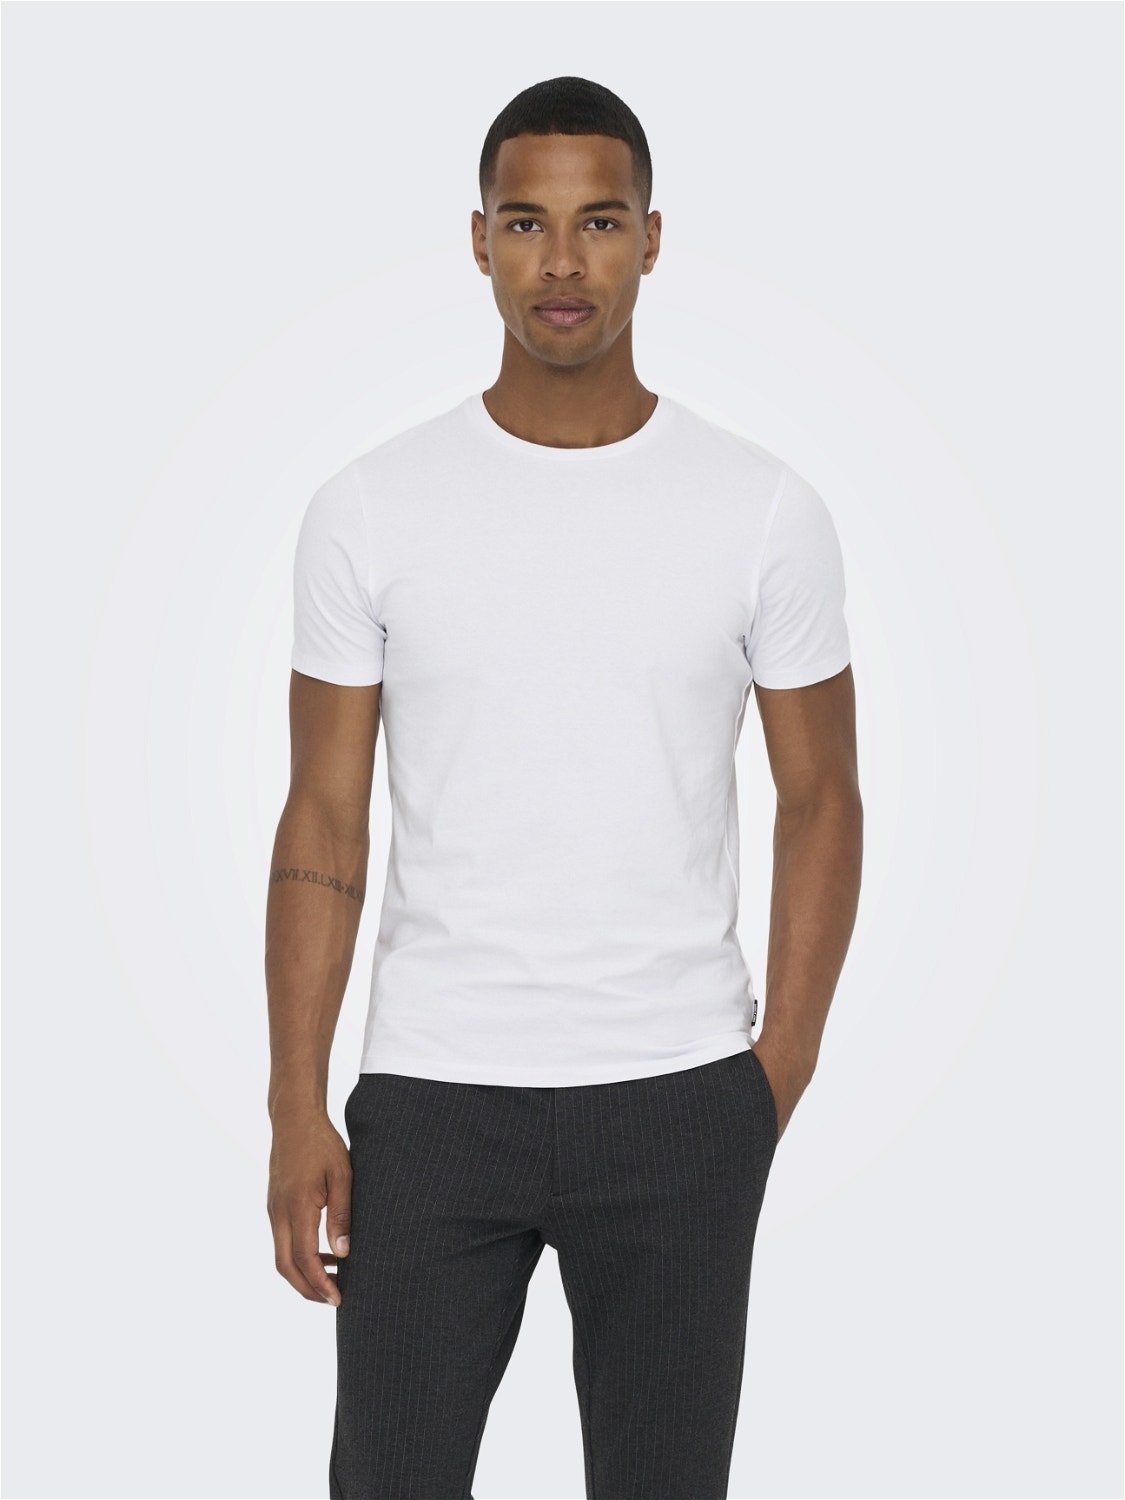 ONLY & SONS 2-pack o-neck t-shirt -White - 22021181